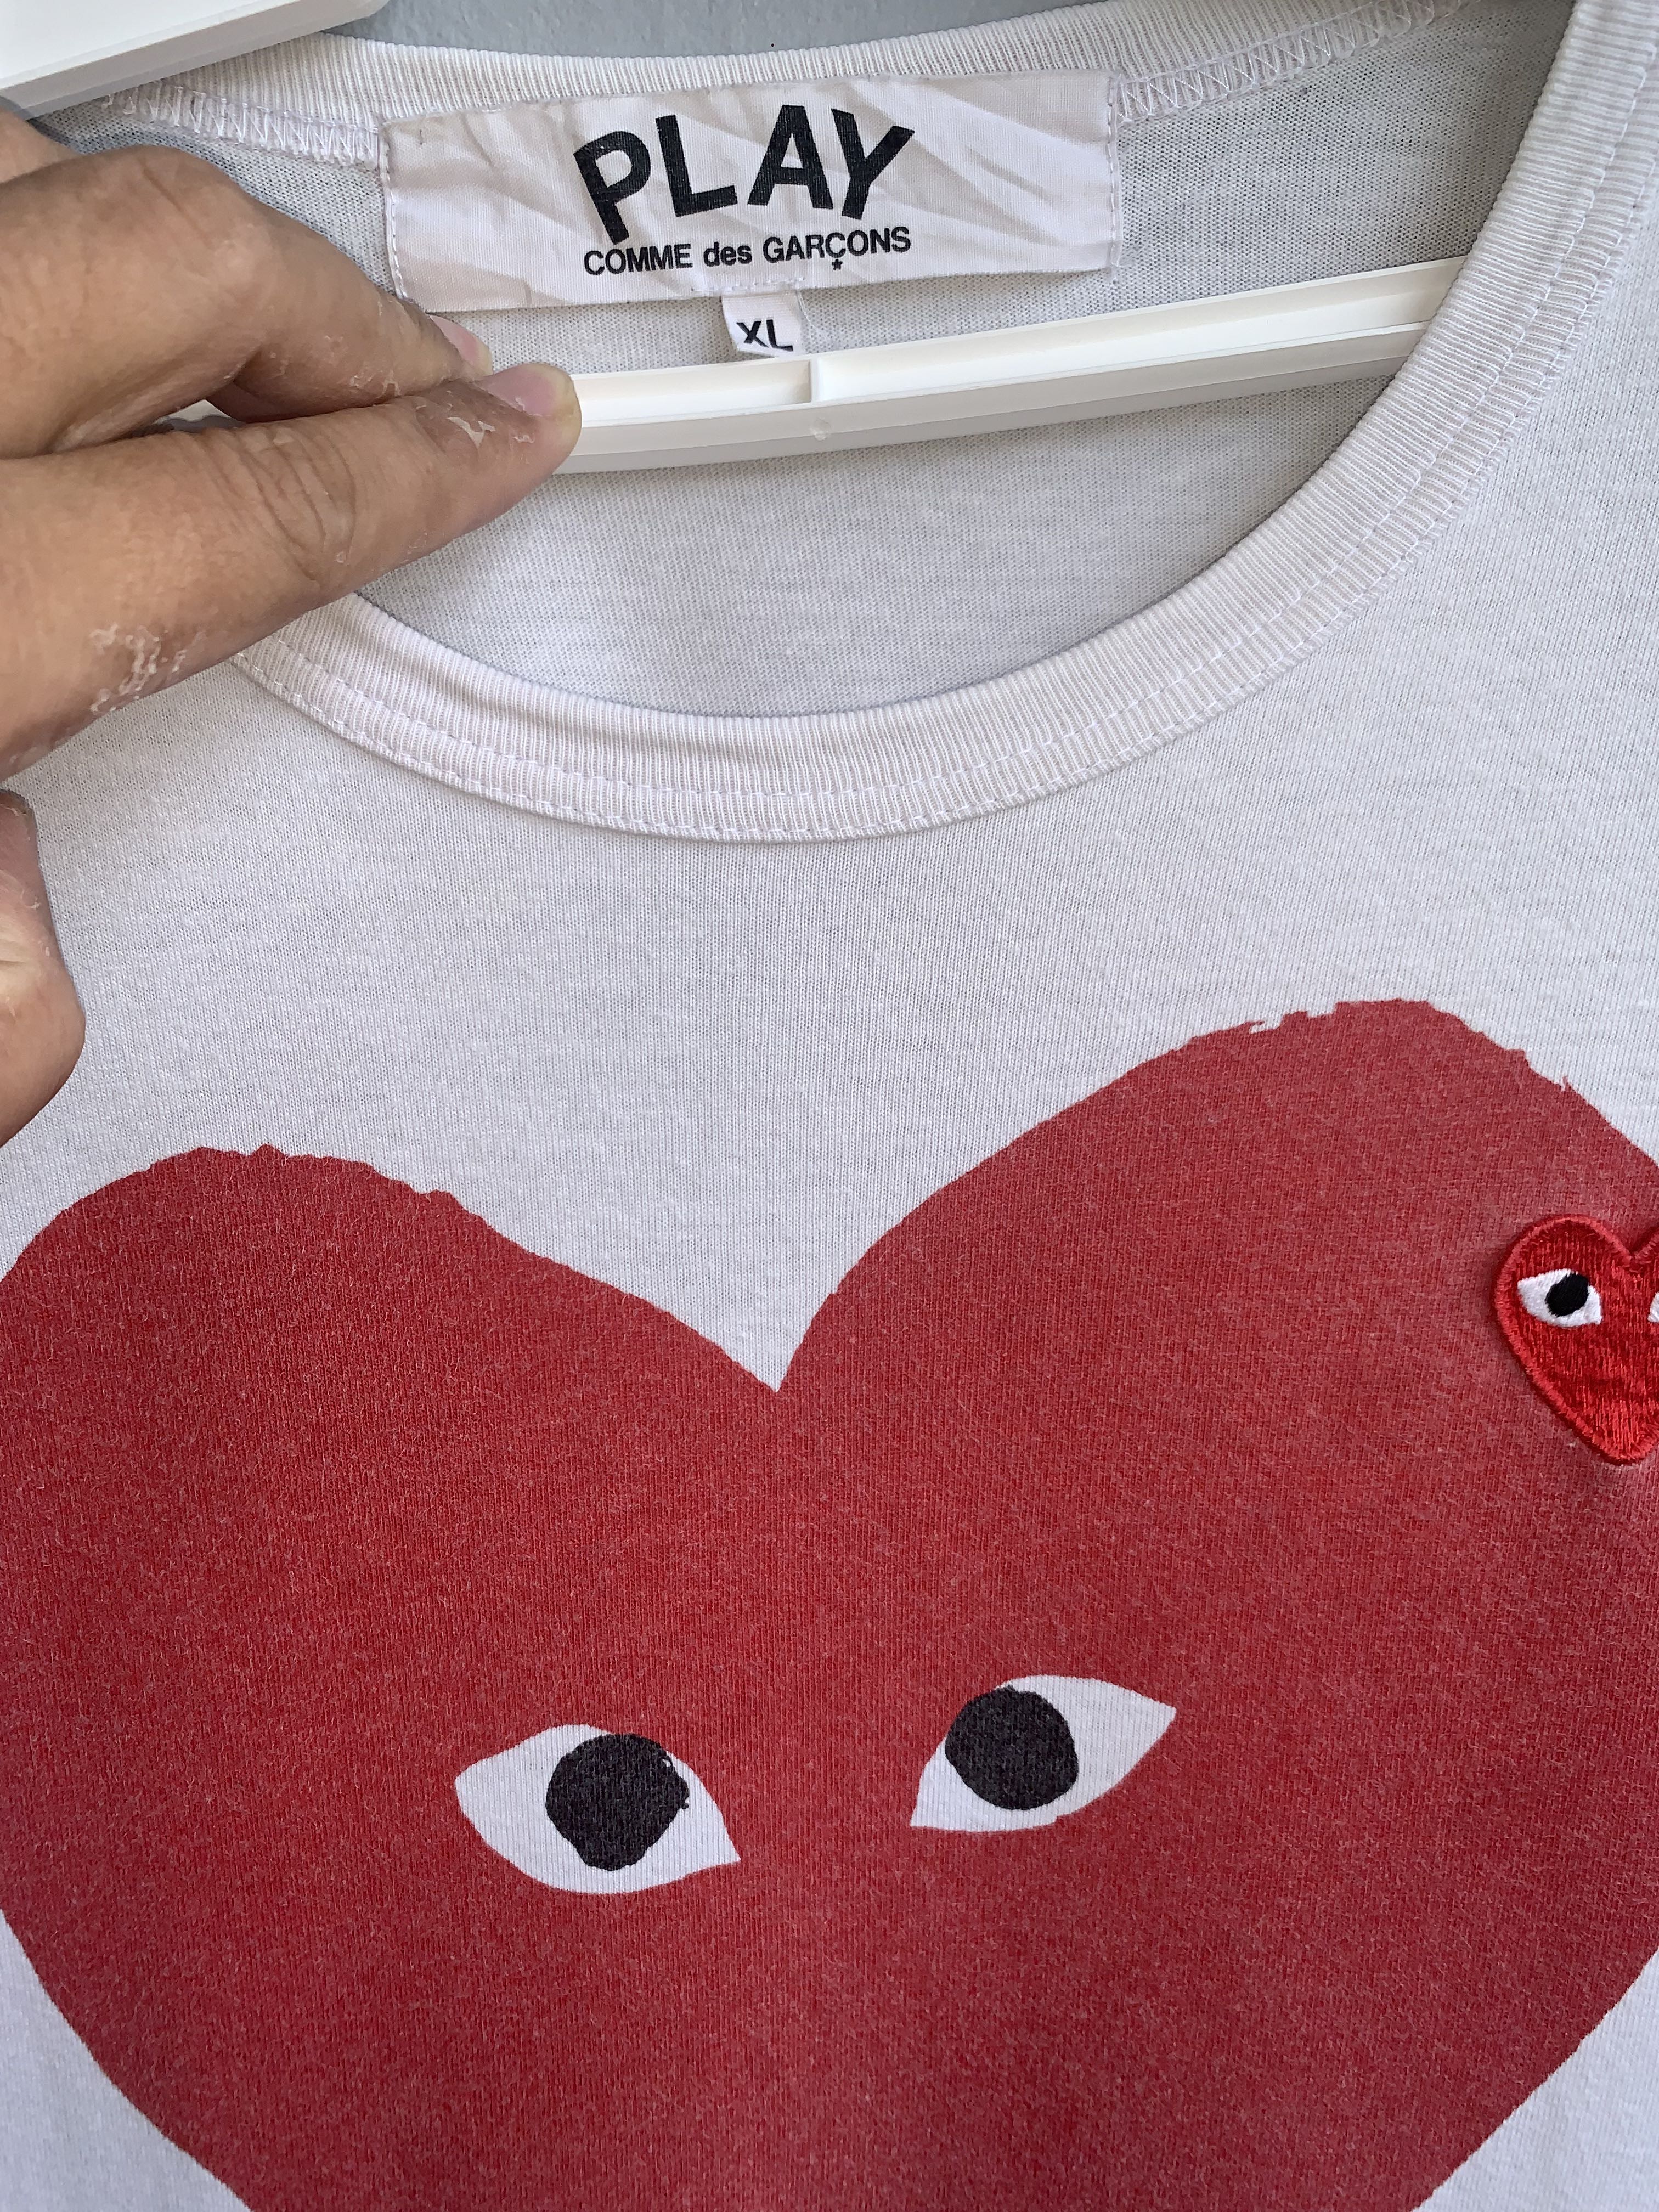 Vintage Comme Des Garcons Play Tee - 2